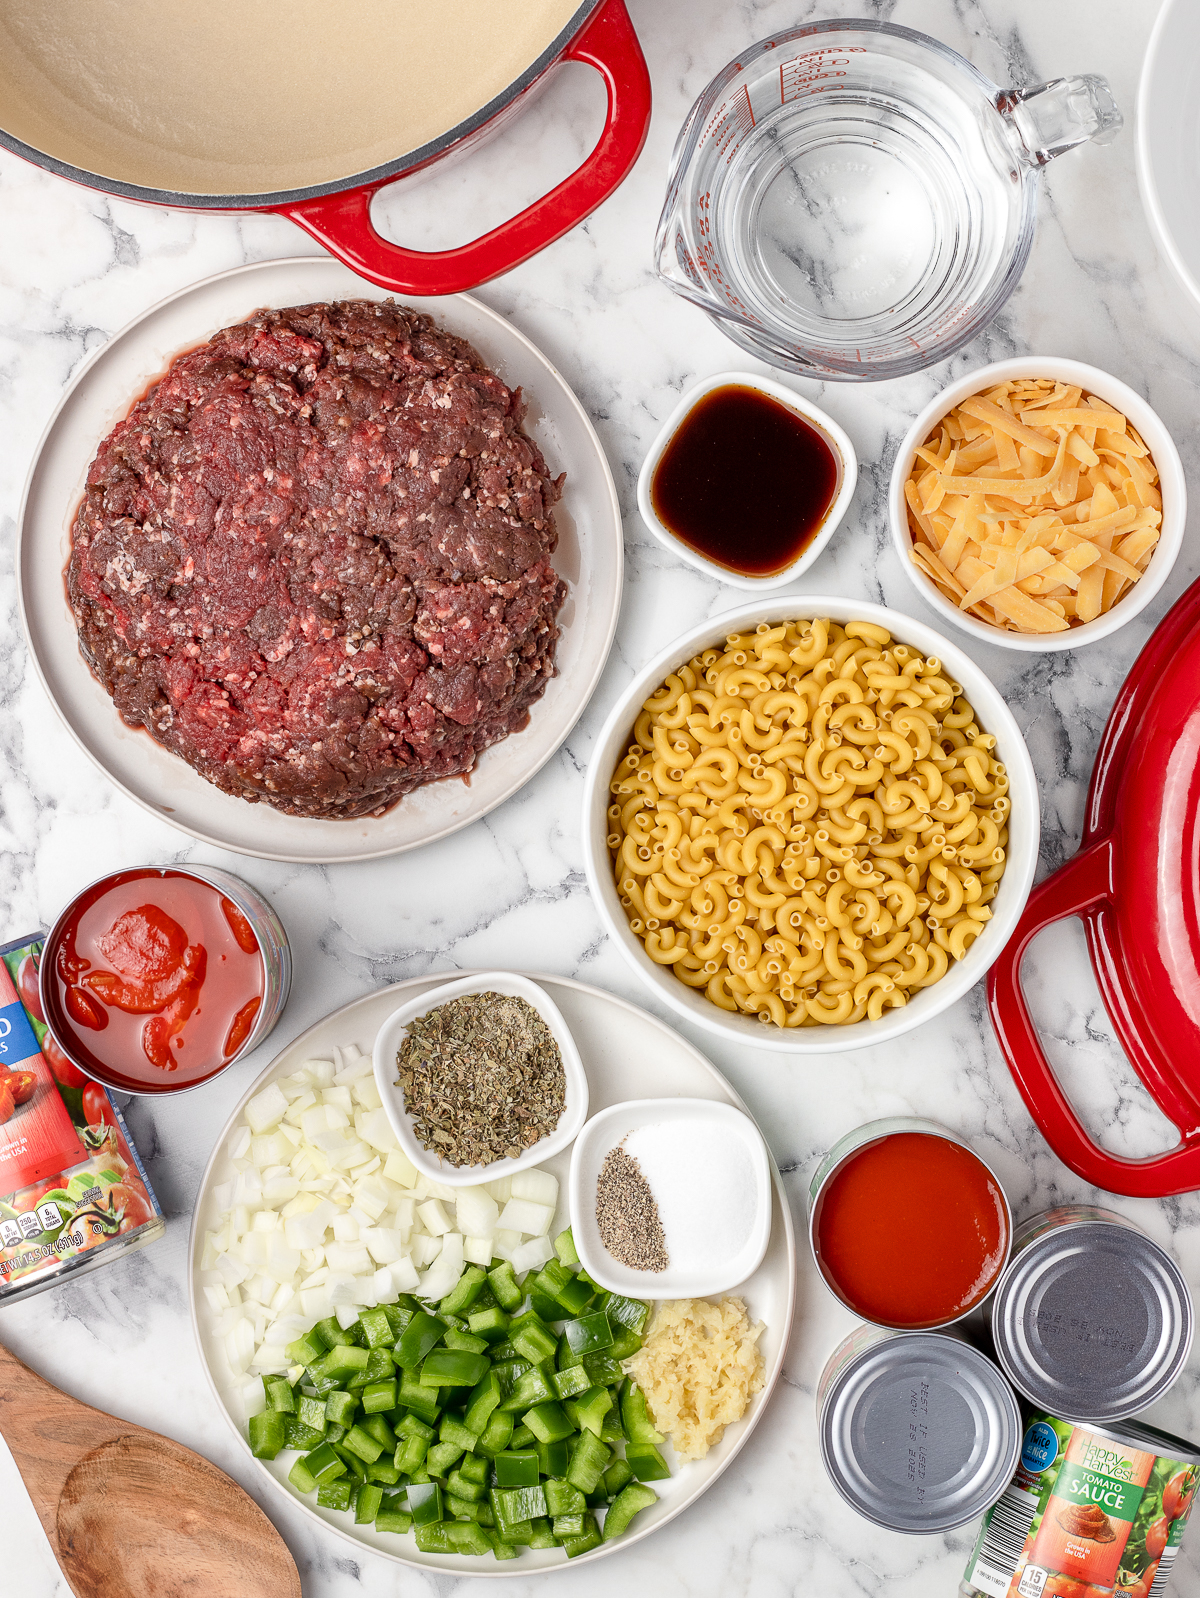 Ingredients for the recipe. Ground venison, yellow onion, green bell pepper, garlic, tomato sauce, stewed tomatoes, water, worcestershire sauce, italian seasoning, salt and black pepper, elbow macaroni, and medium cheddar cheese.